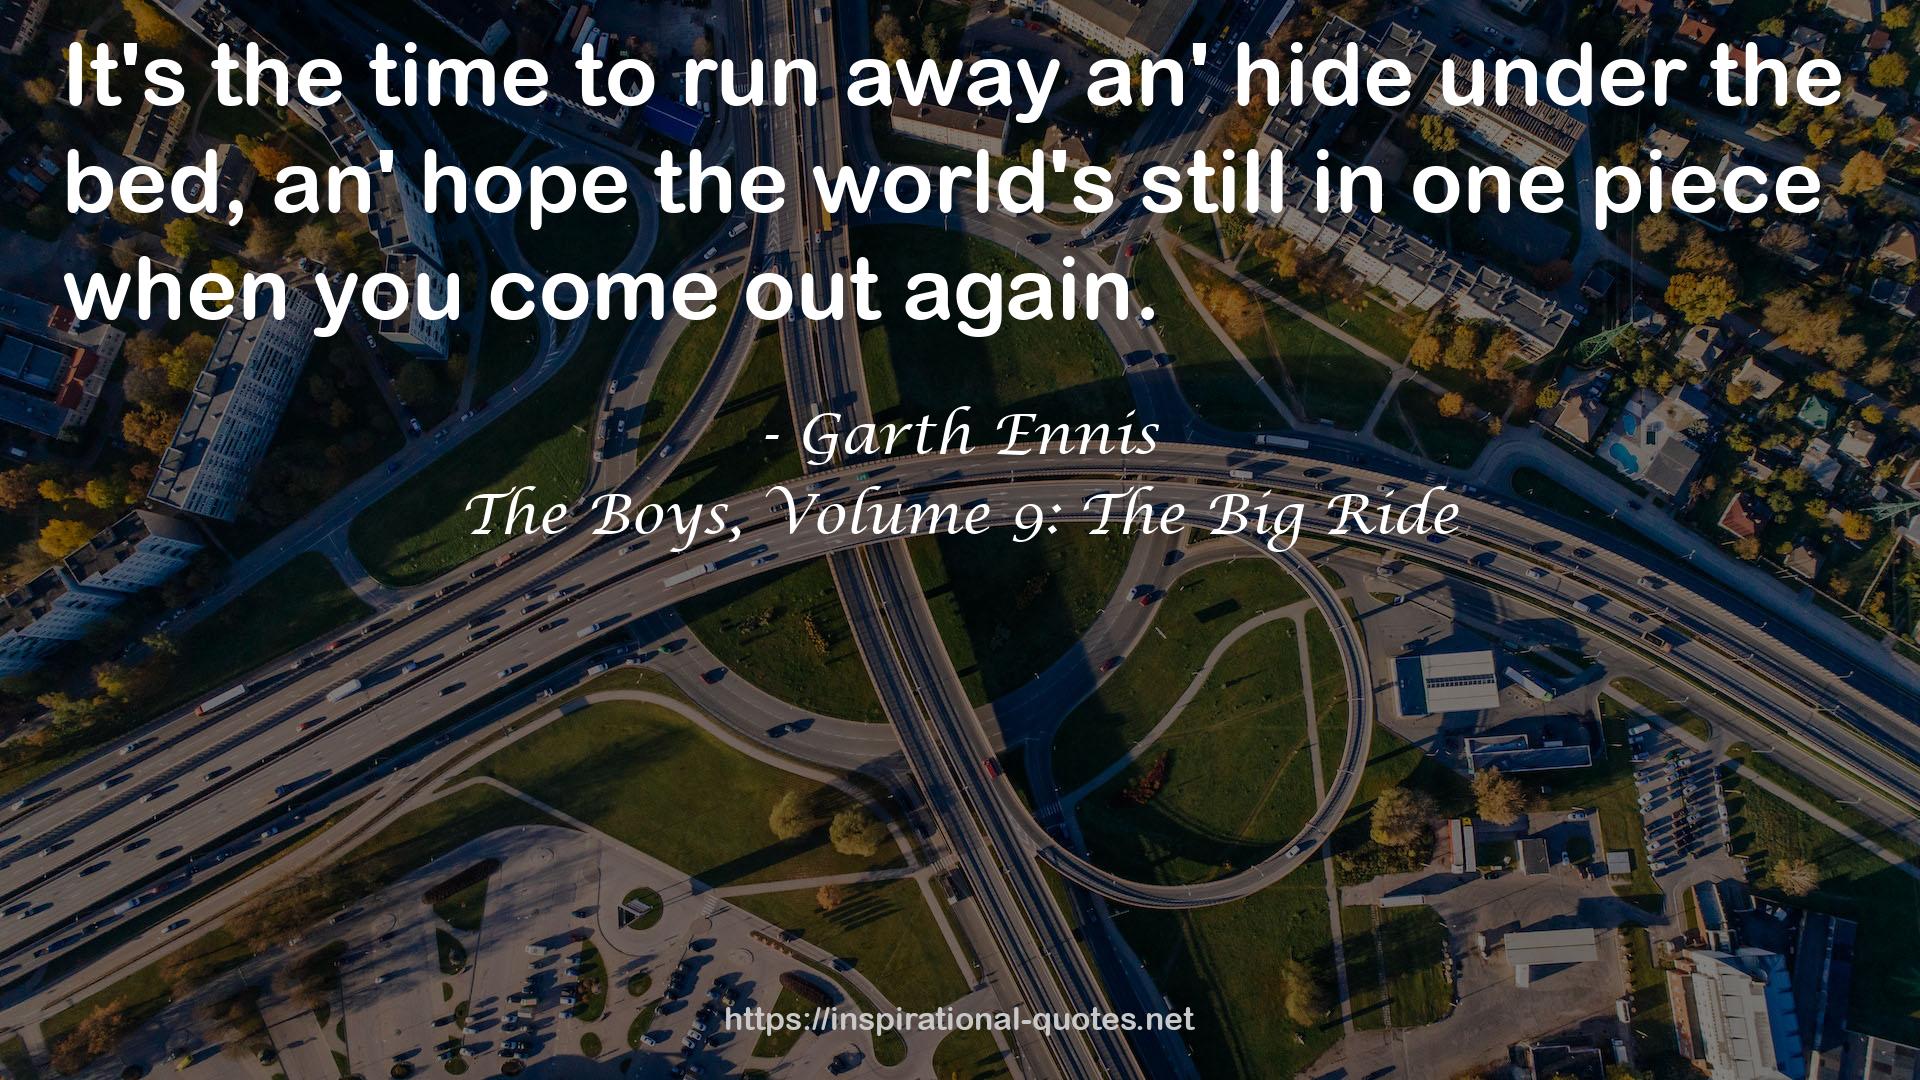 The Boys, Volume 9: The Big Ride QUOTES